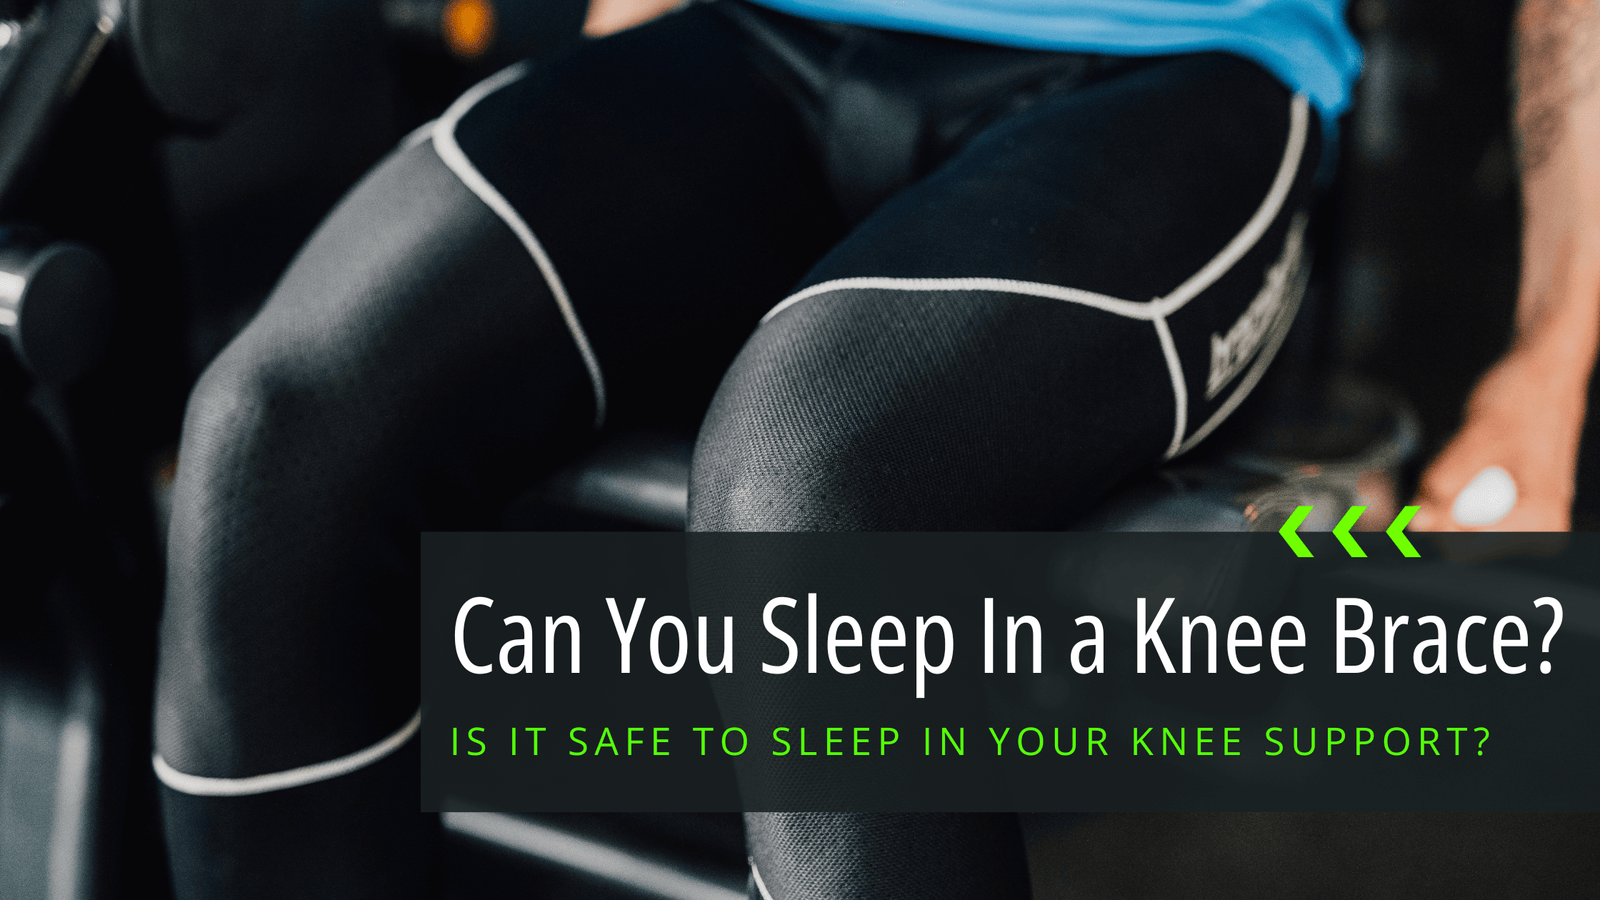 Blog header for "Can you sleep in a knee brace or knee compression sleeves?" Learn more about sleeping in a knee brace, sleep in knee brace, do doctors recommend sleeping in knee braces?